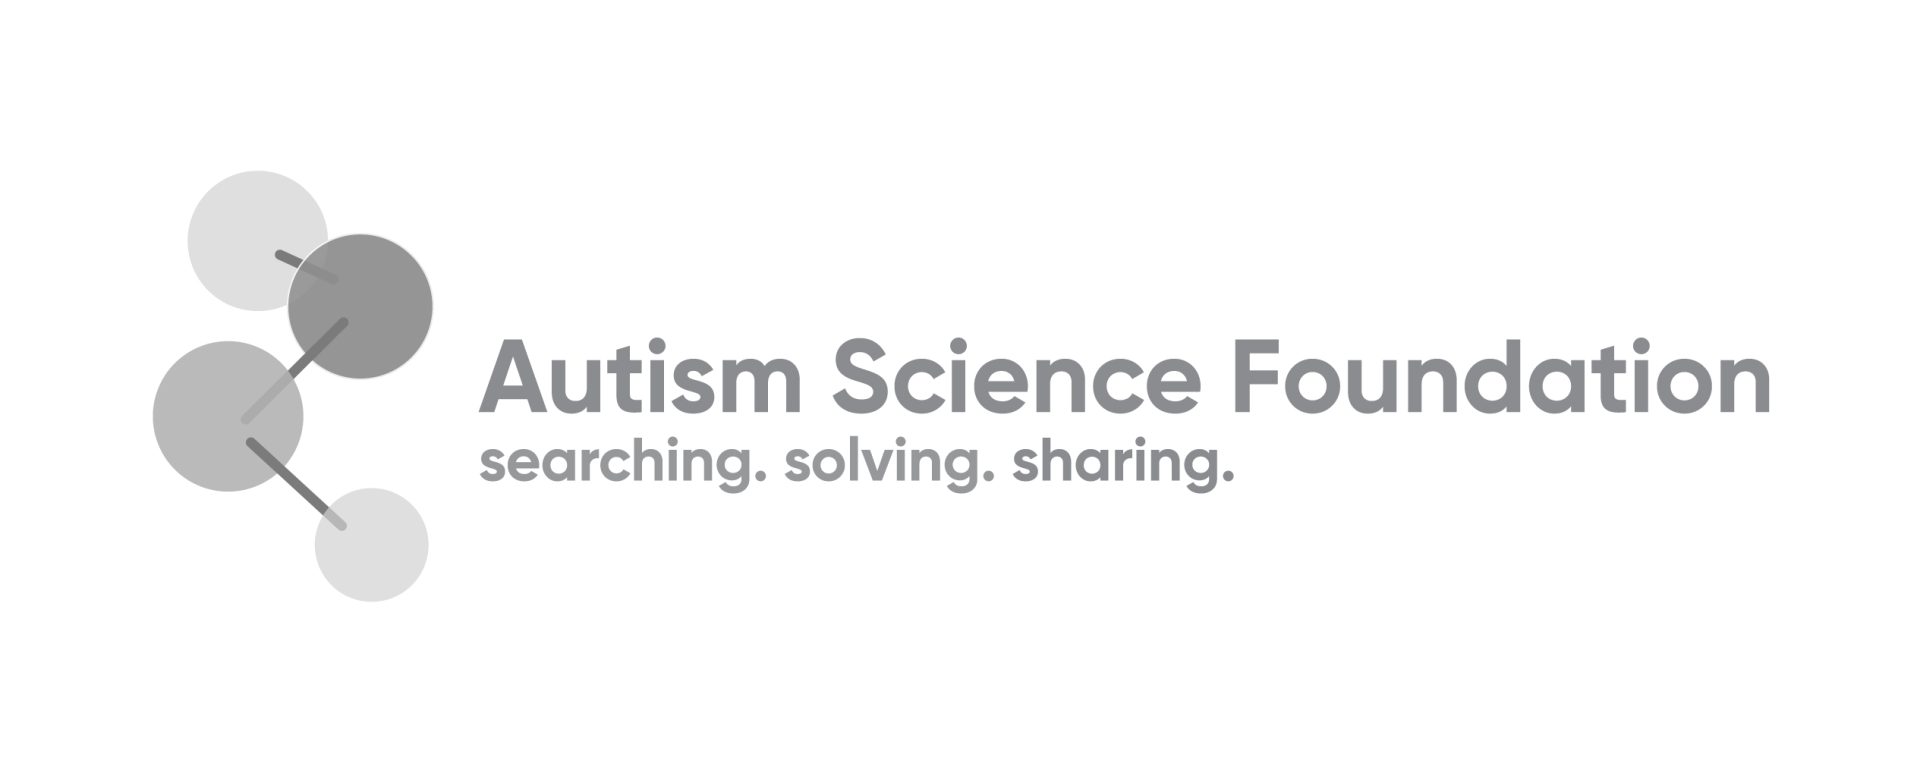 interior Prevalence of Autism Spectrum Disorder Among Children Aged 8 Years – Autism and Developmental Disabilities Monitoring Network, 11 Sites, United States, 2014 banner image